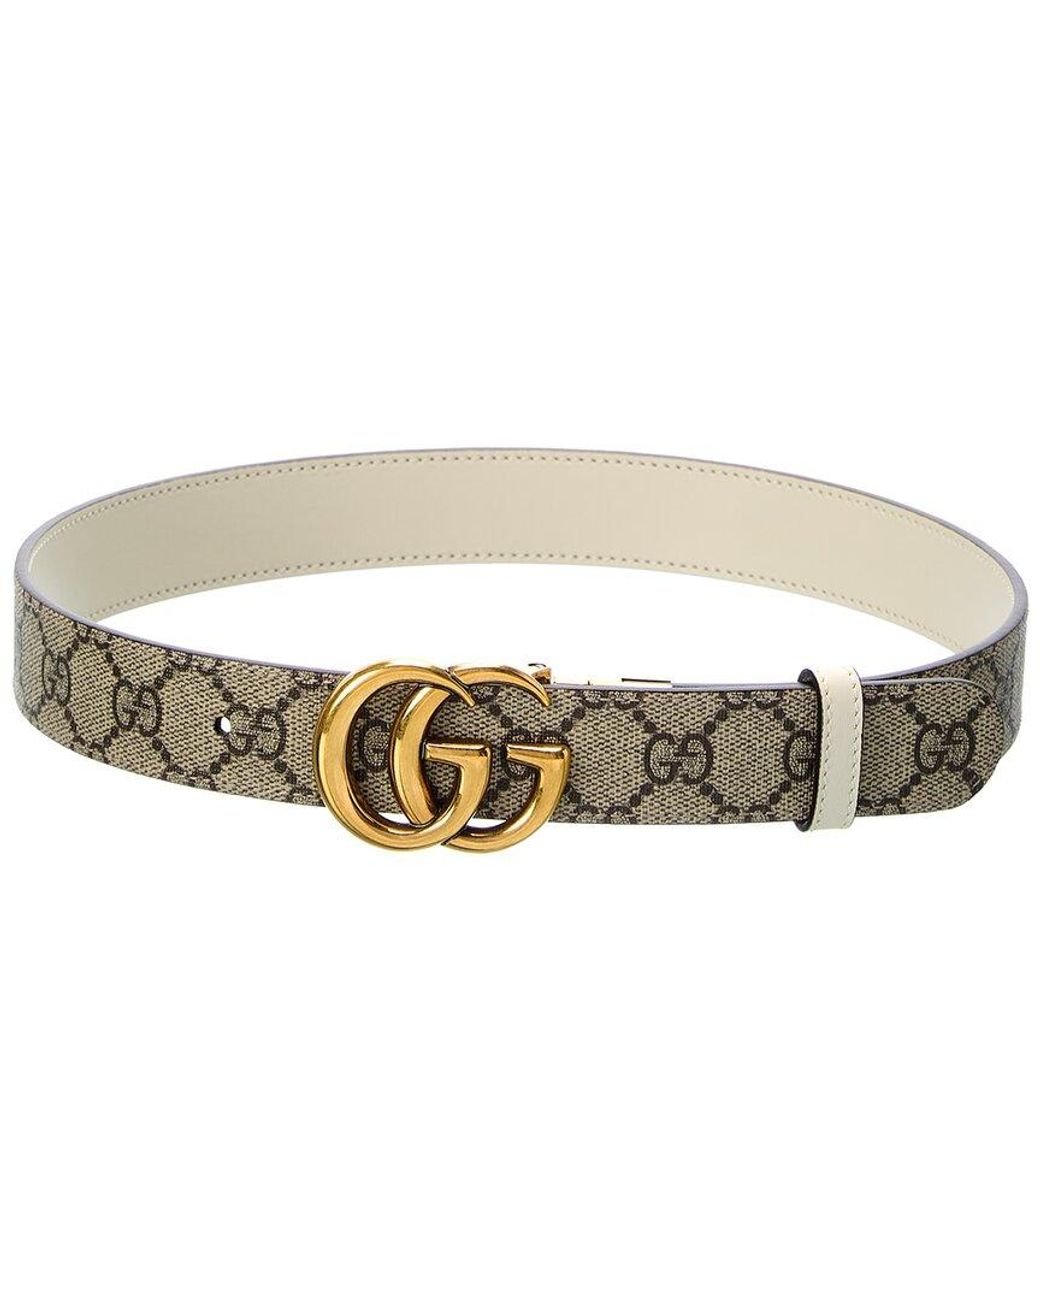 Gucci GG Marmont Canvas Leather Reversible Belt (Belts,Wide